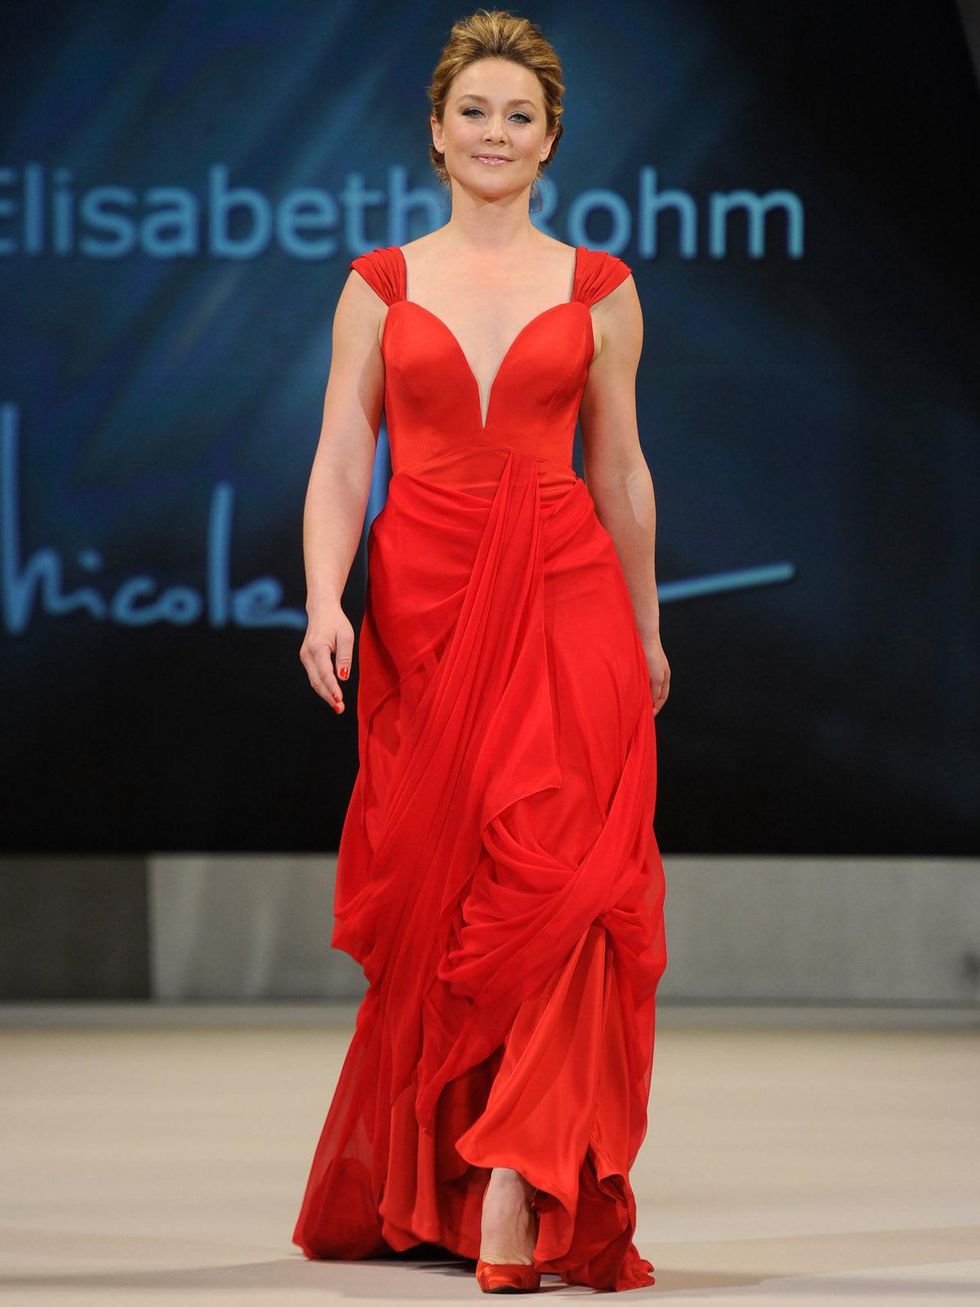 News_The Heart Truth Red Dress Collection_Fall 2012_Elisabeth Rohm